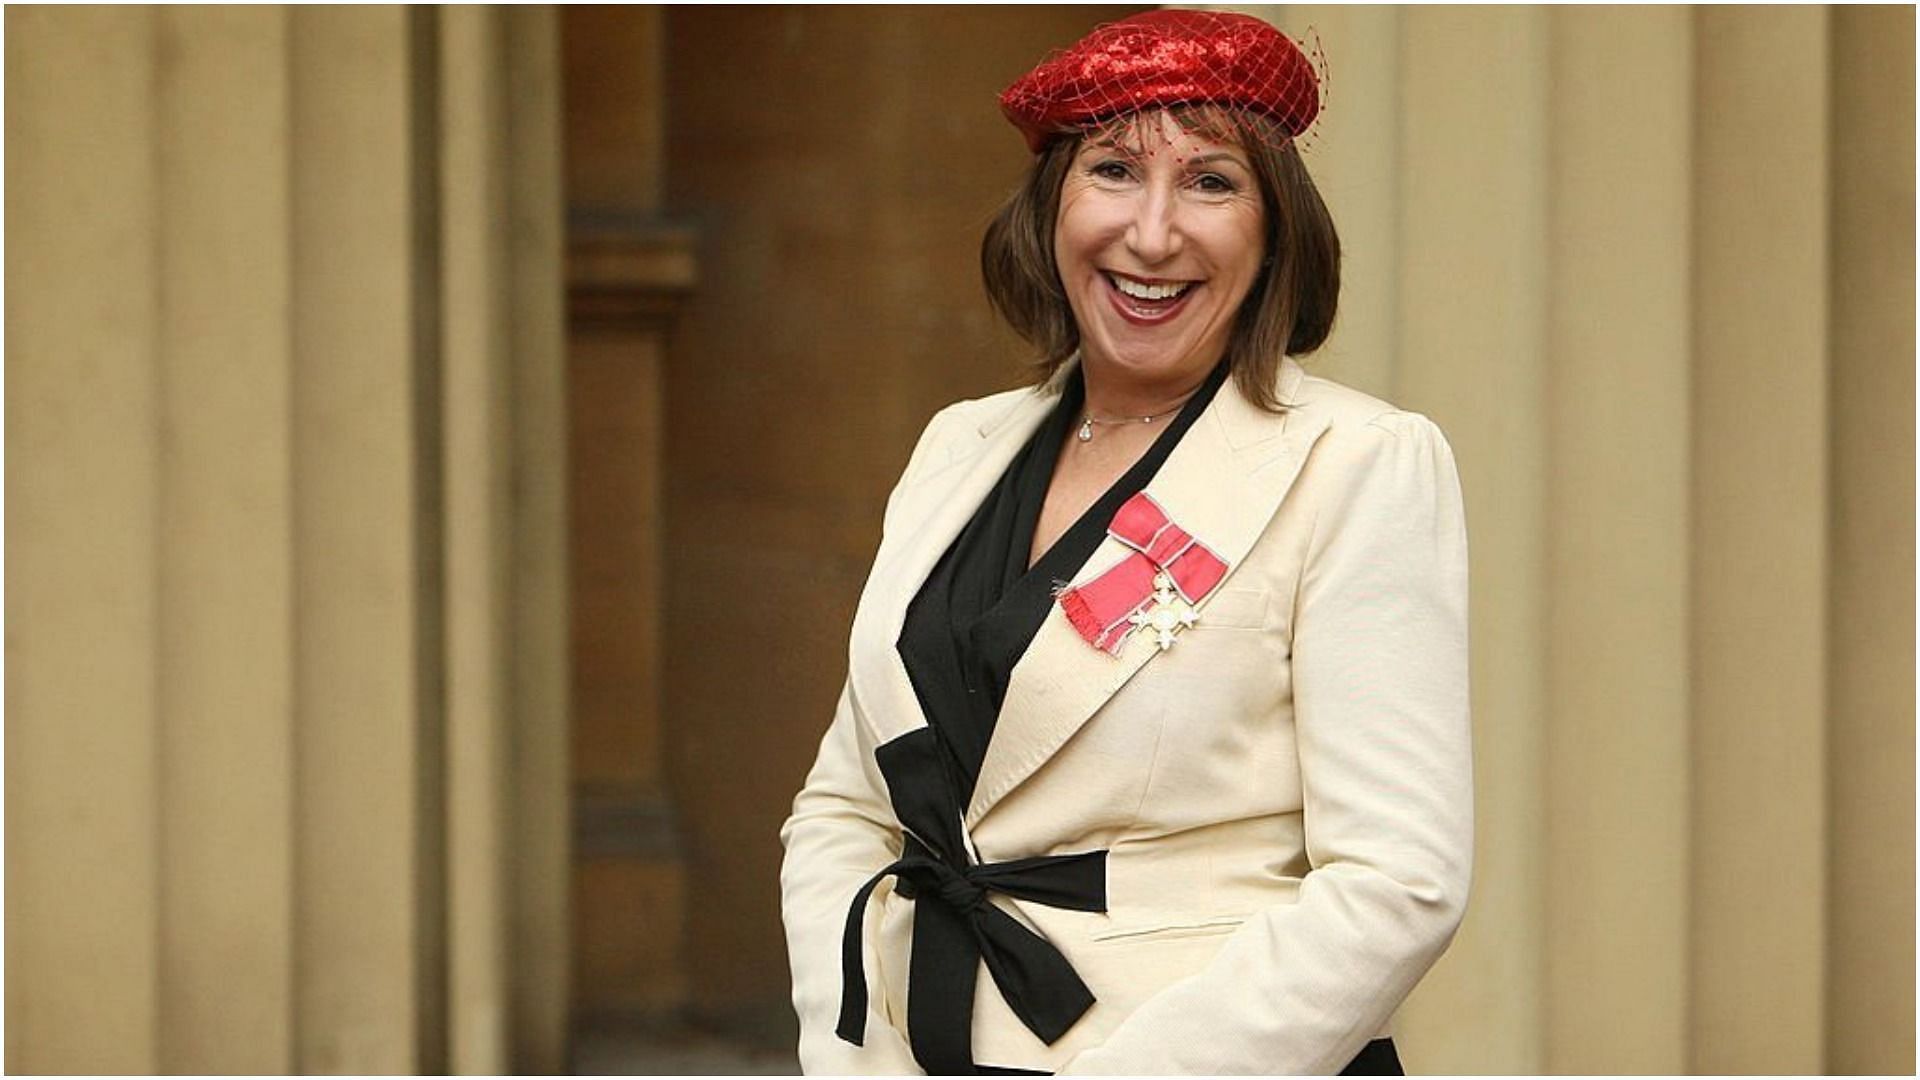 Kay Mellor recently died at the age of 71 (Image via Dominic Lipinski/Getty Images)